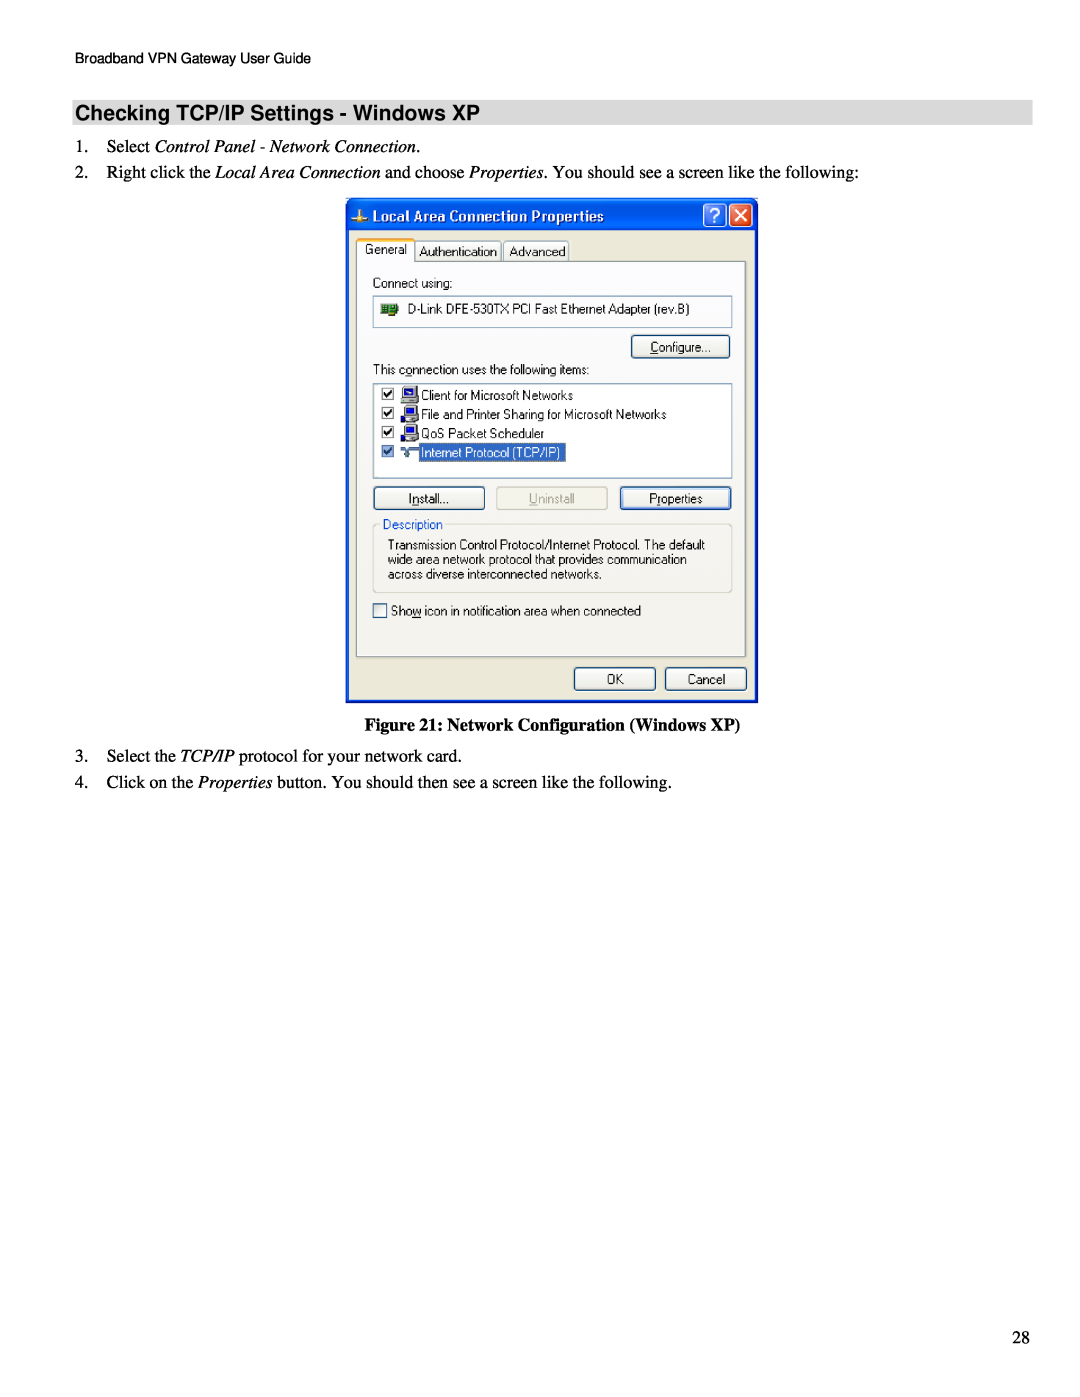 TRENDnet TW100-BRV324 manual Checking TCP/IP Settings - Windows XP, Select Control Panel - Network Connection 